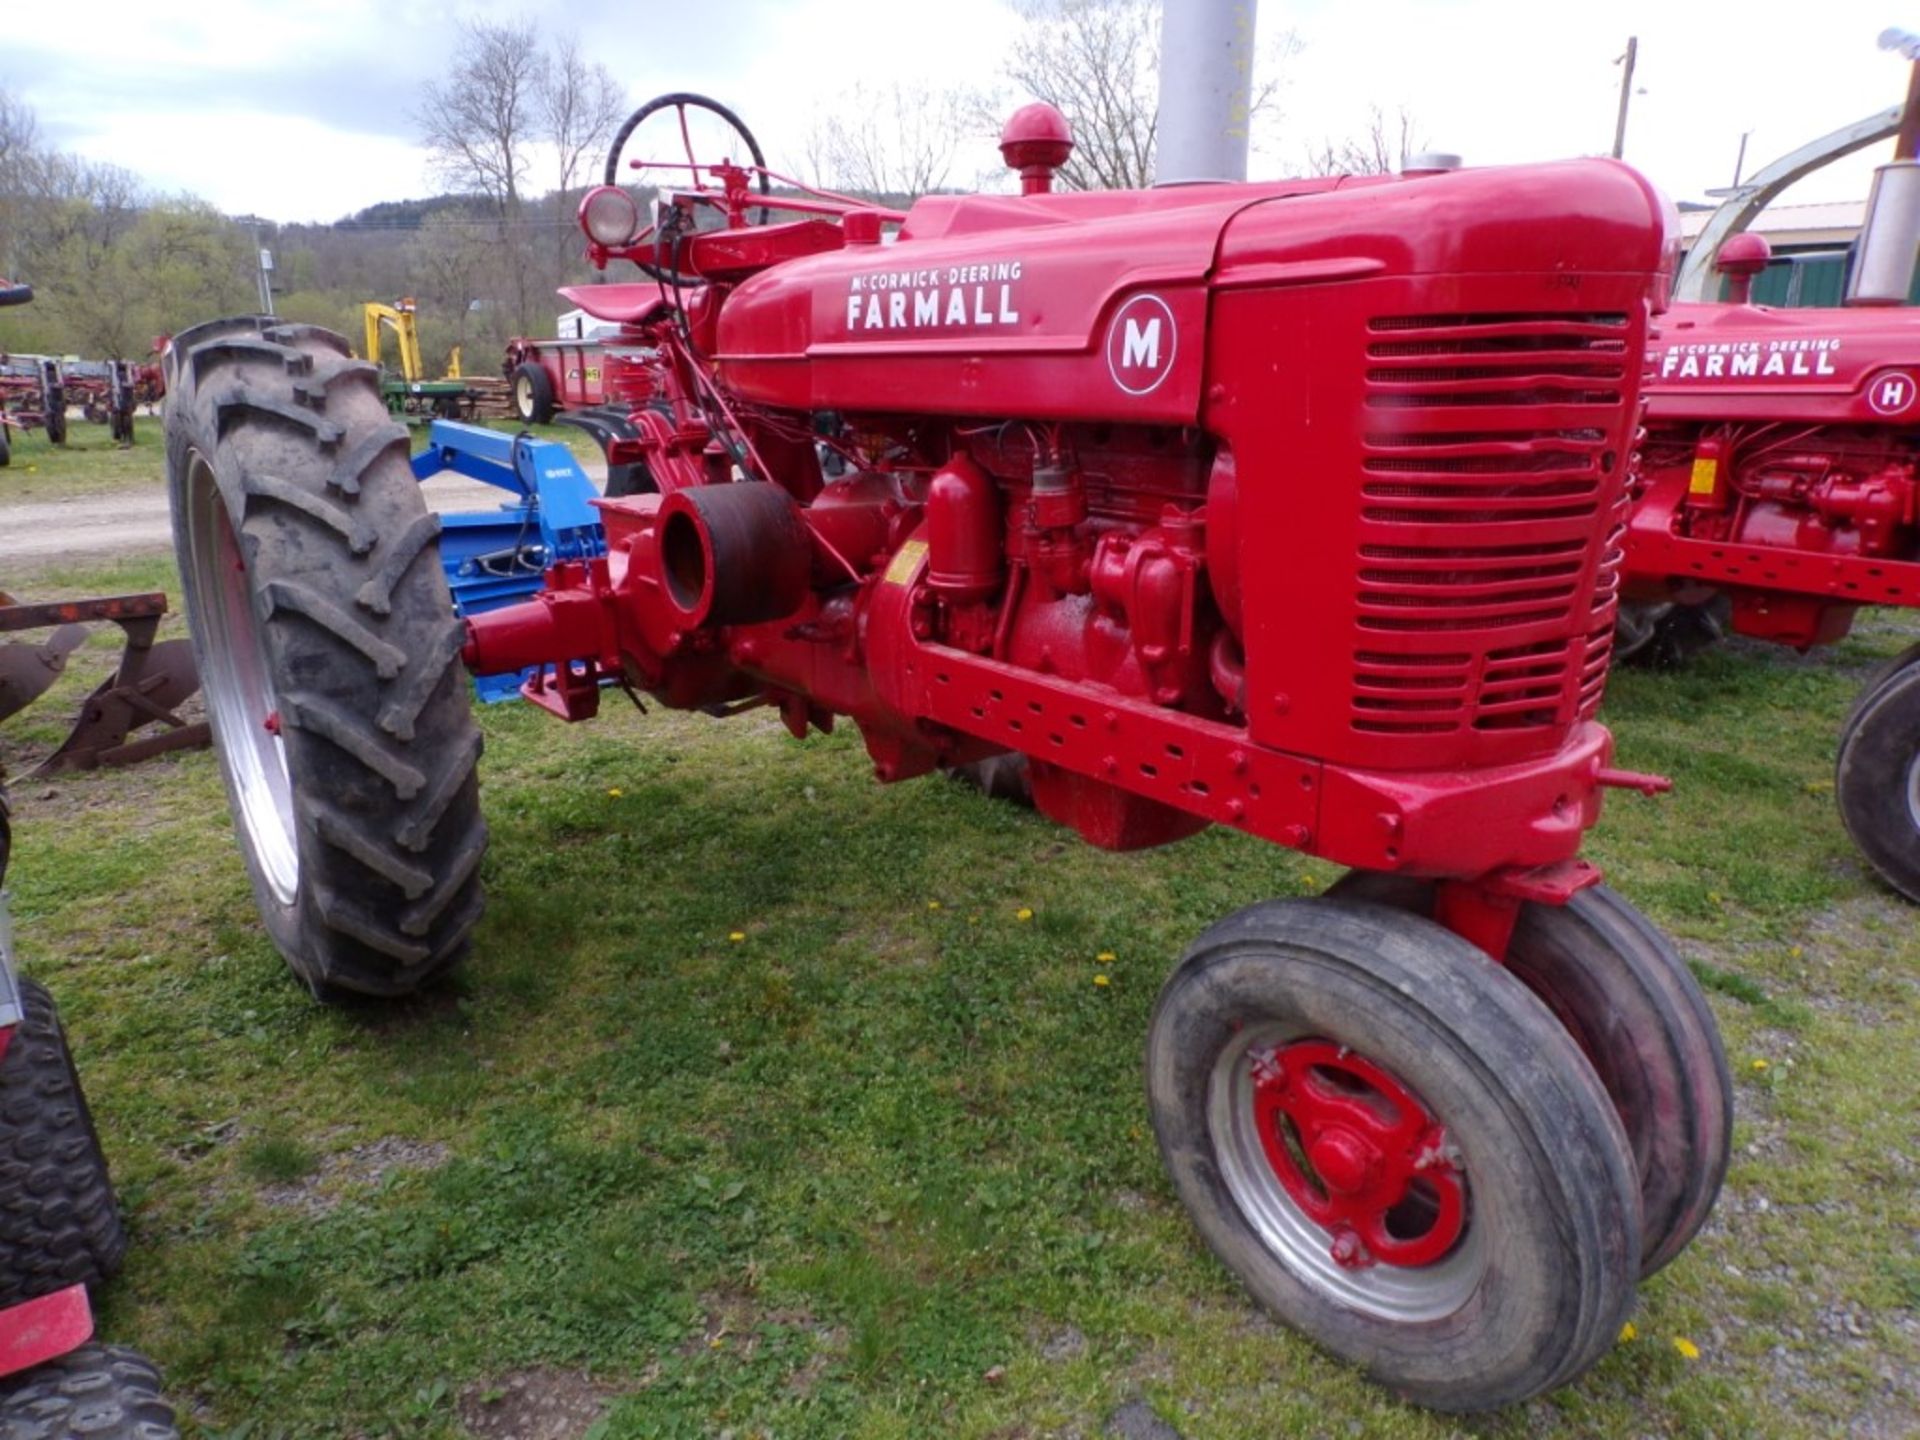 Farmall M Narrow Front, PTO, Side Pulley, Restored (5123) - Image 2 of 3